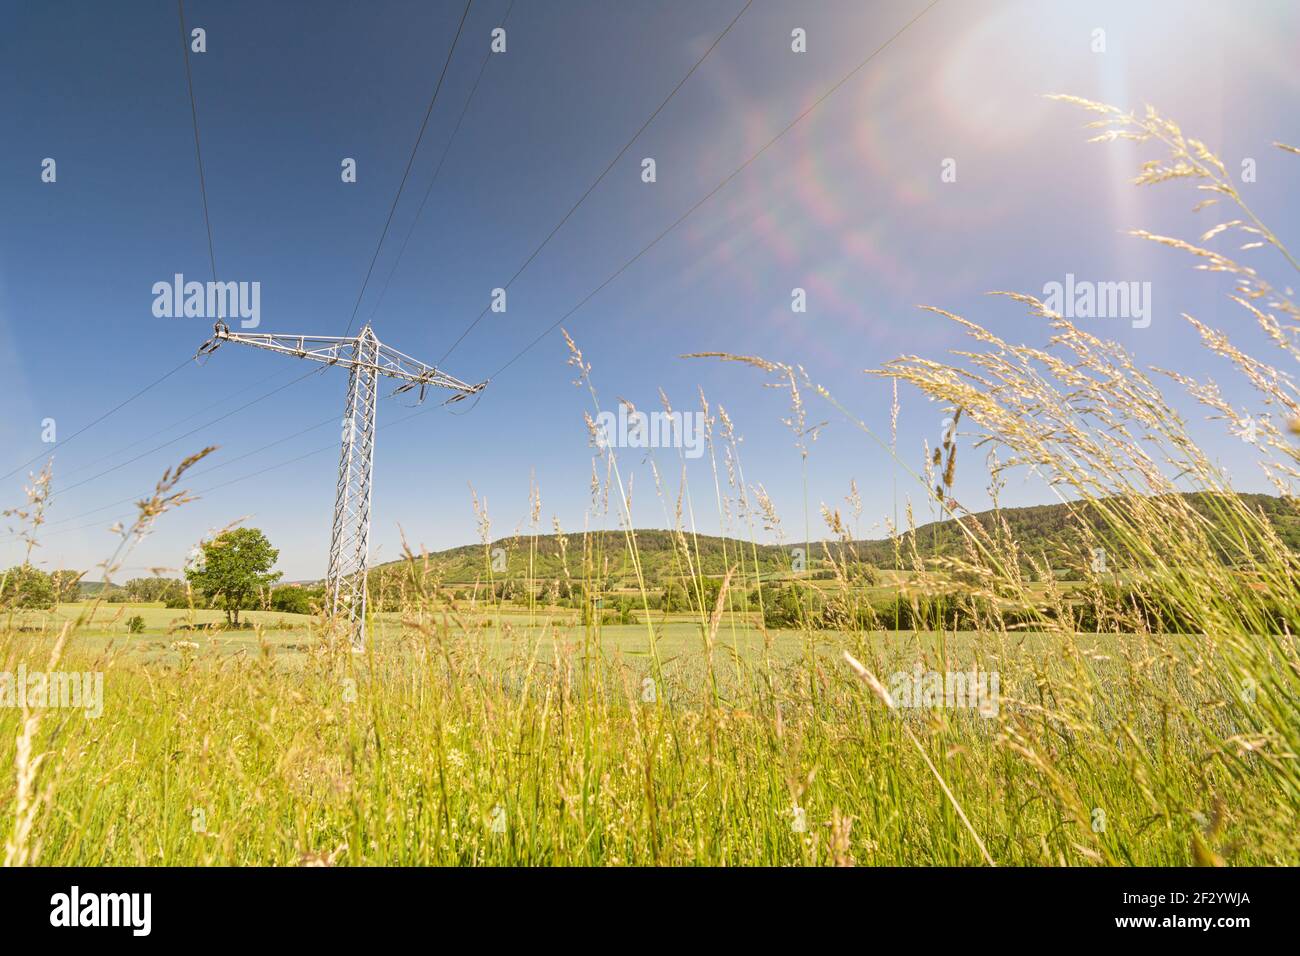 Electricity pylon and sun rays in a field symbolizing green electricity and renewable energy Stock Photo